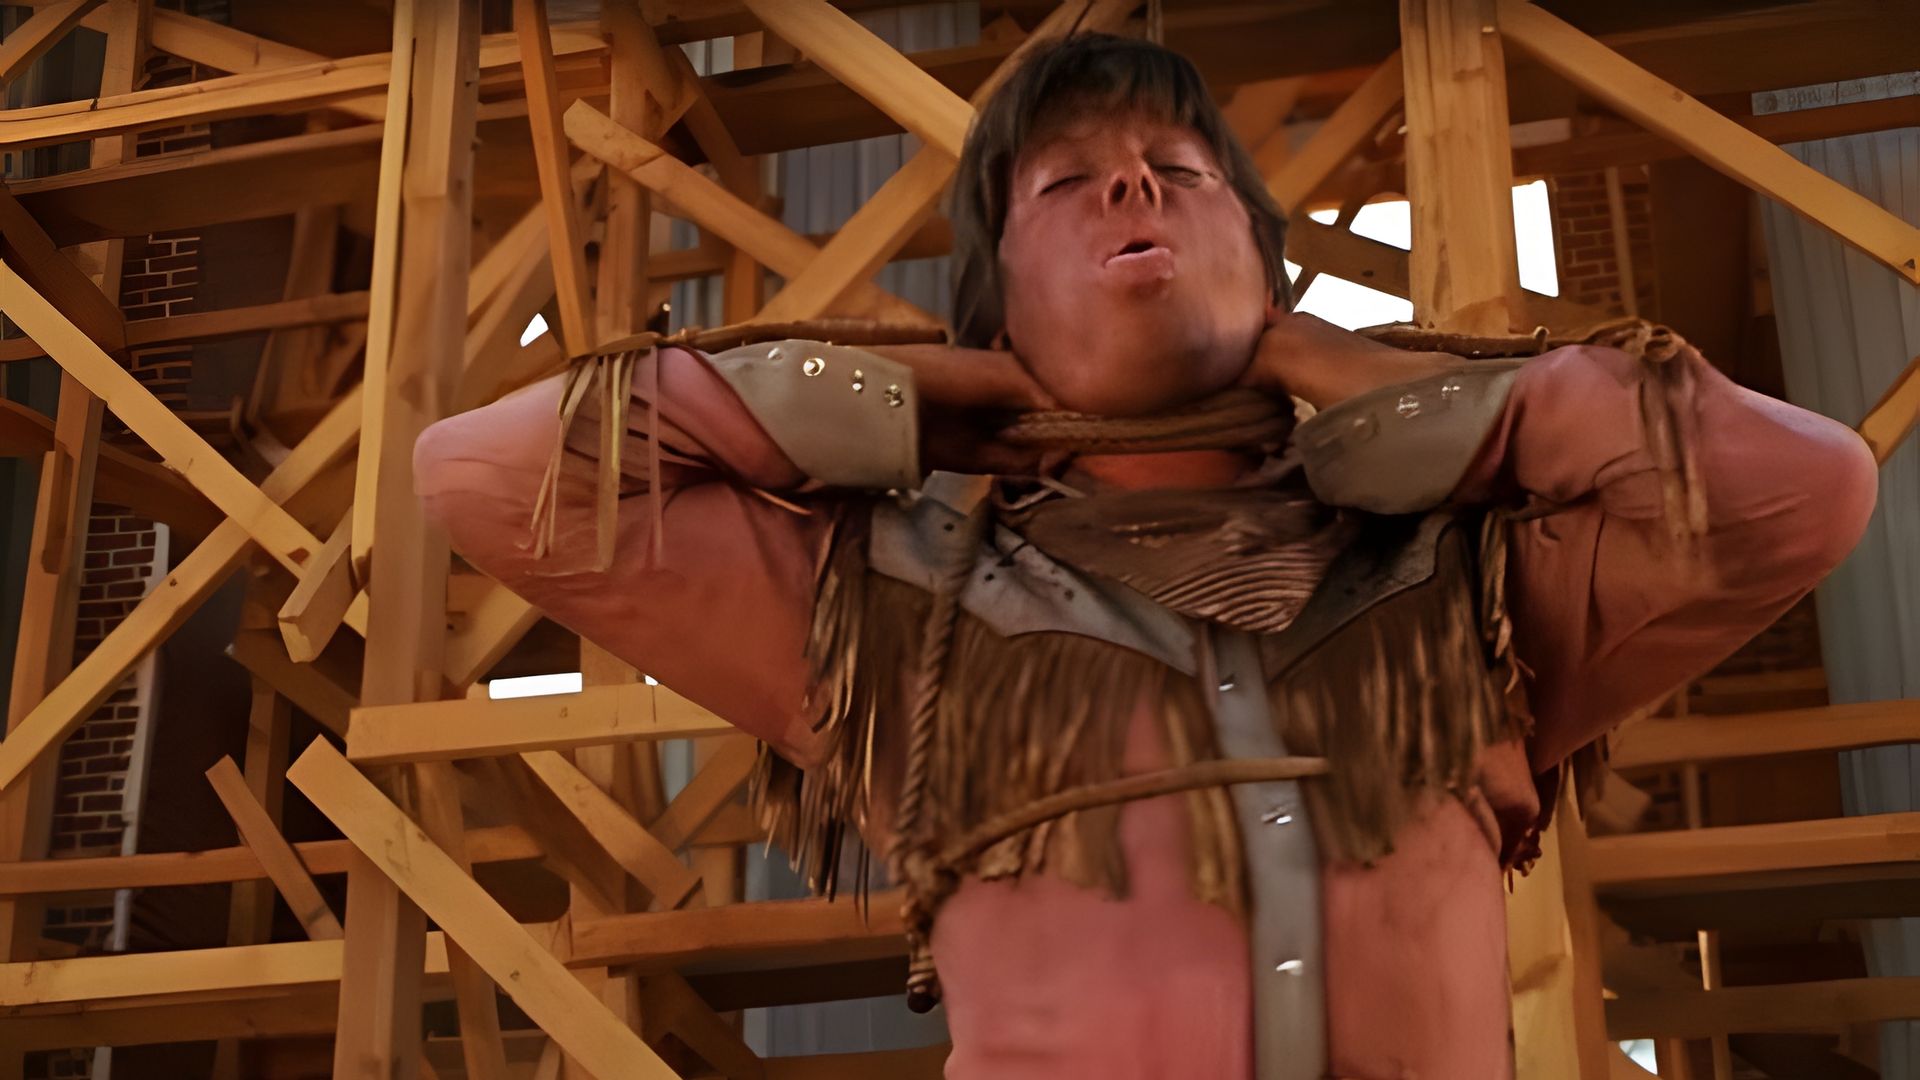 Michael J. Fox nearly suffocated on the gallows